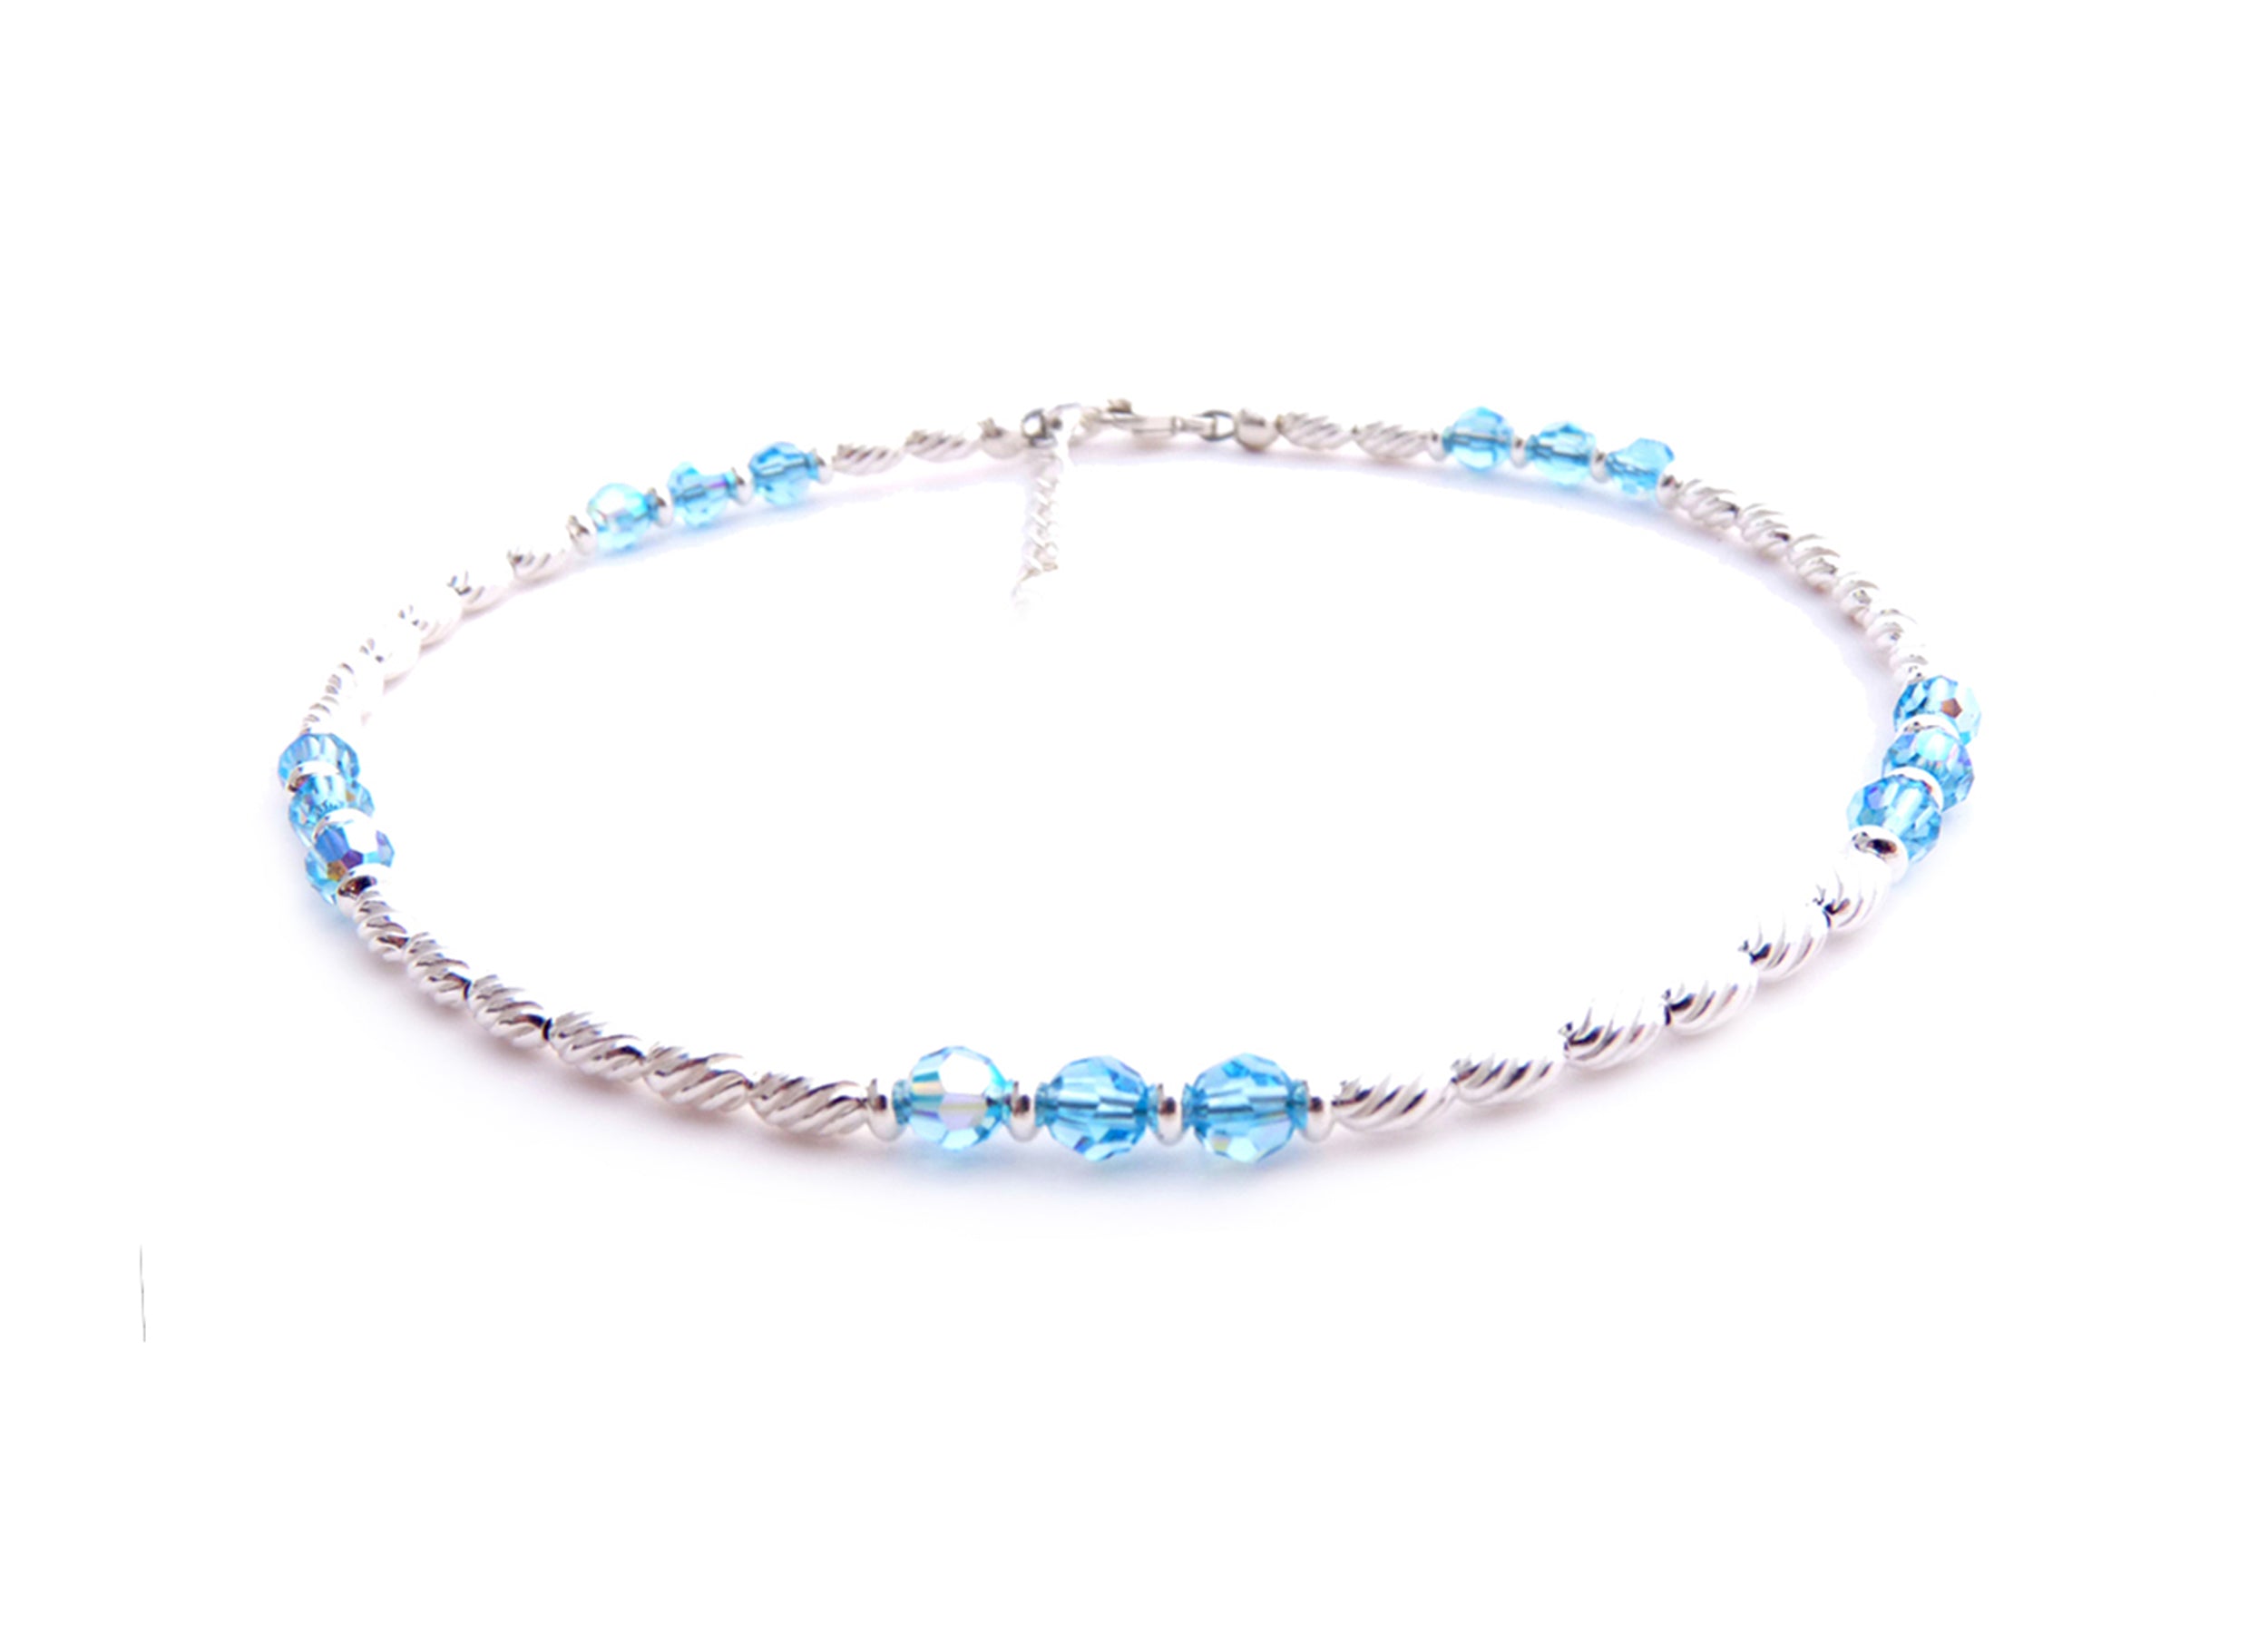 Handmade Sterling Silver Crystal Beaded Anklets available in all birthstones! 